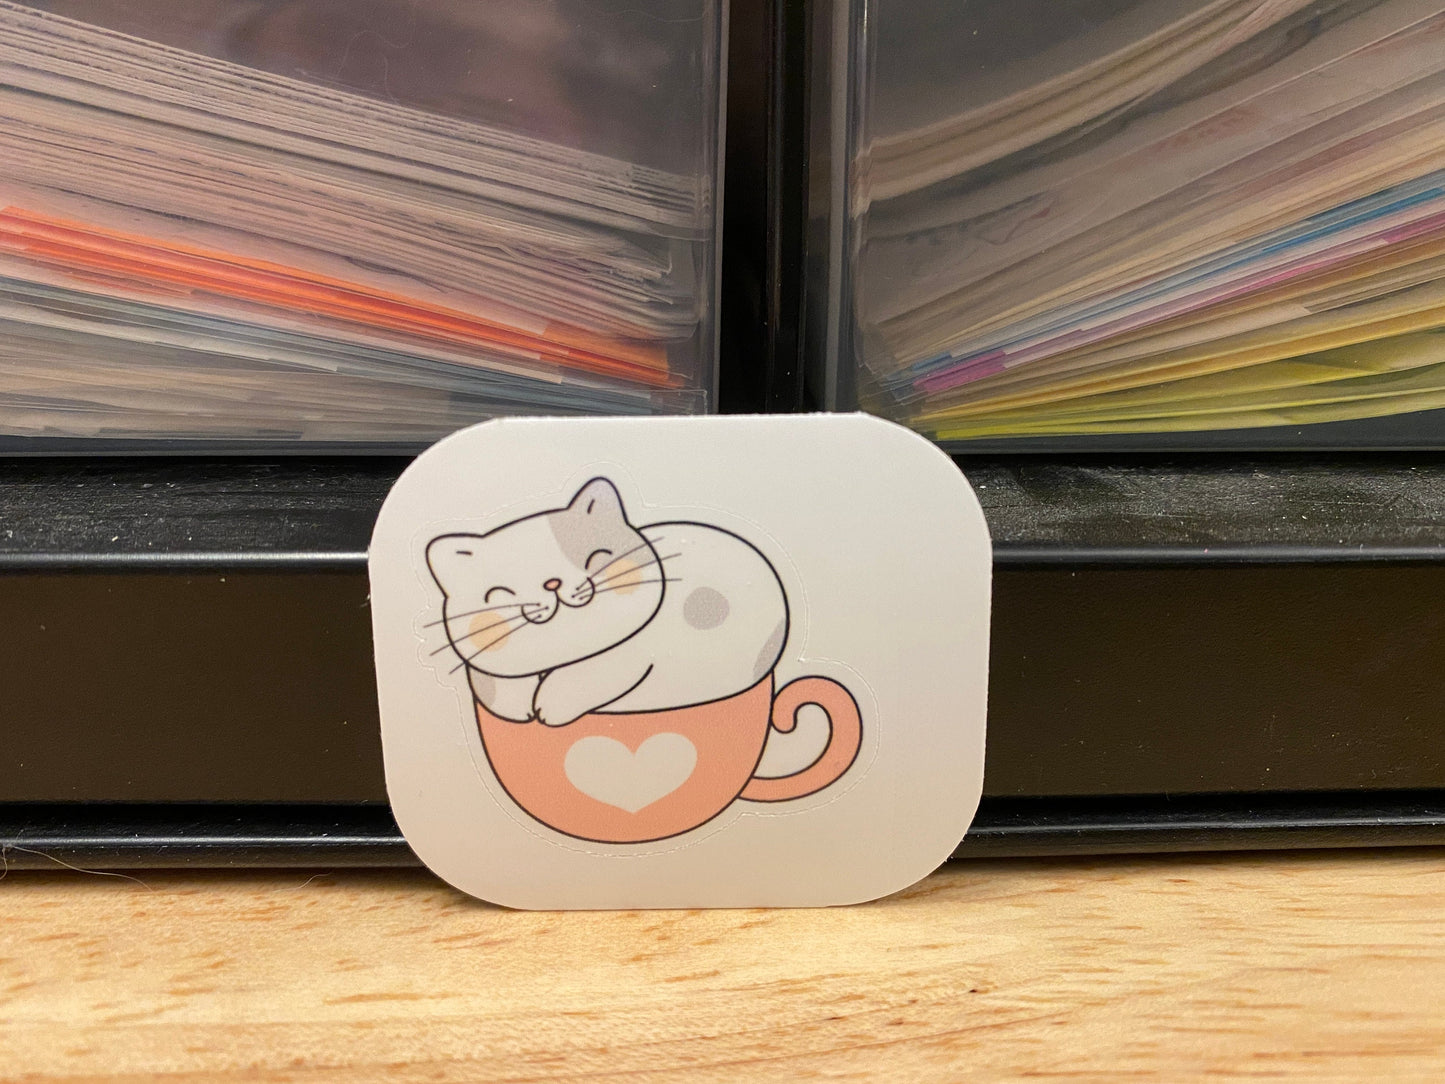 Pink Cup with Heart Kitty STICKER, Cat in cup Sticker, Holographic option, Cute Cat Design Sticker, Coffee Cup cat sticker